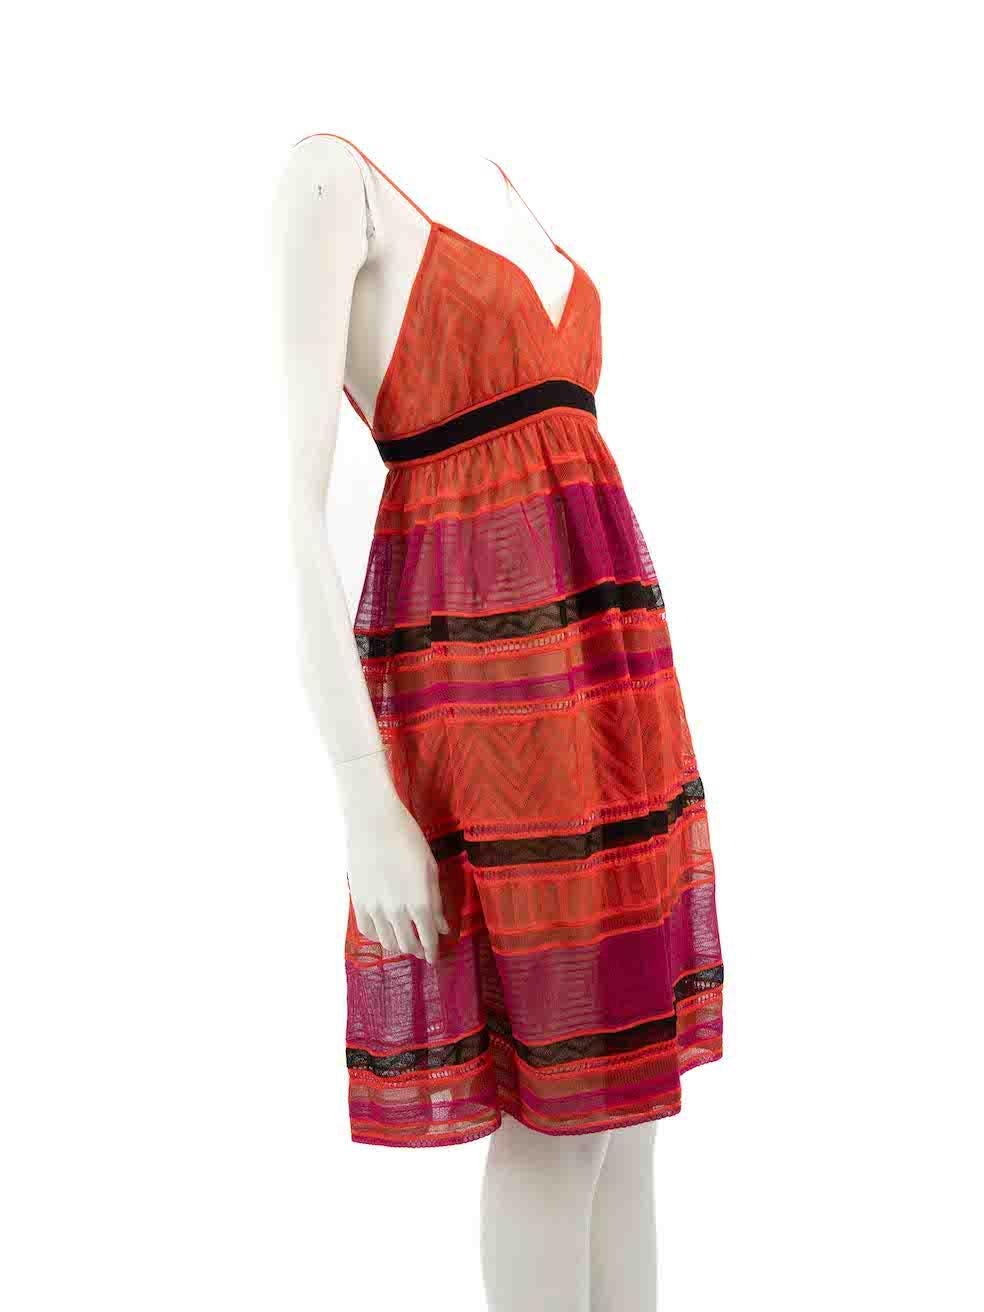 CONDITION is Very good. Minimal wear to dress is evident. Minimal wear to the left side (as worn) lining on cup, where there is a pluck to the weave on this used M Missoni designer resale item.
 
 
 
 Details
 
 
 Red
 
 Cotton
 
 Knee length dress
